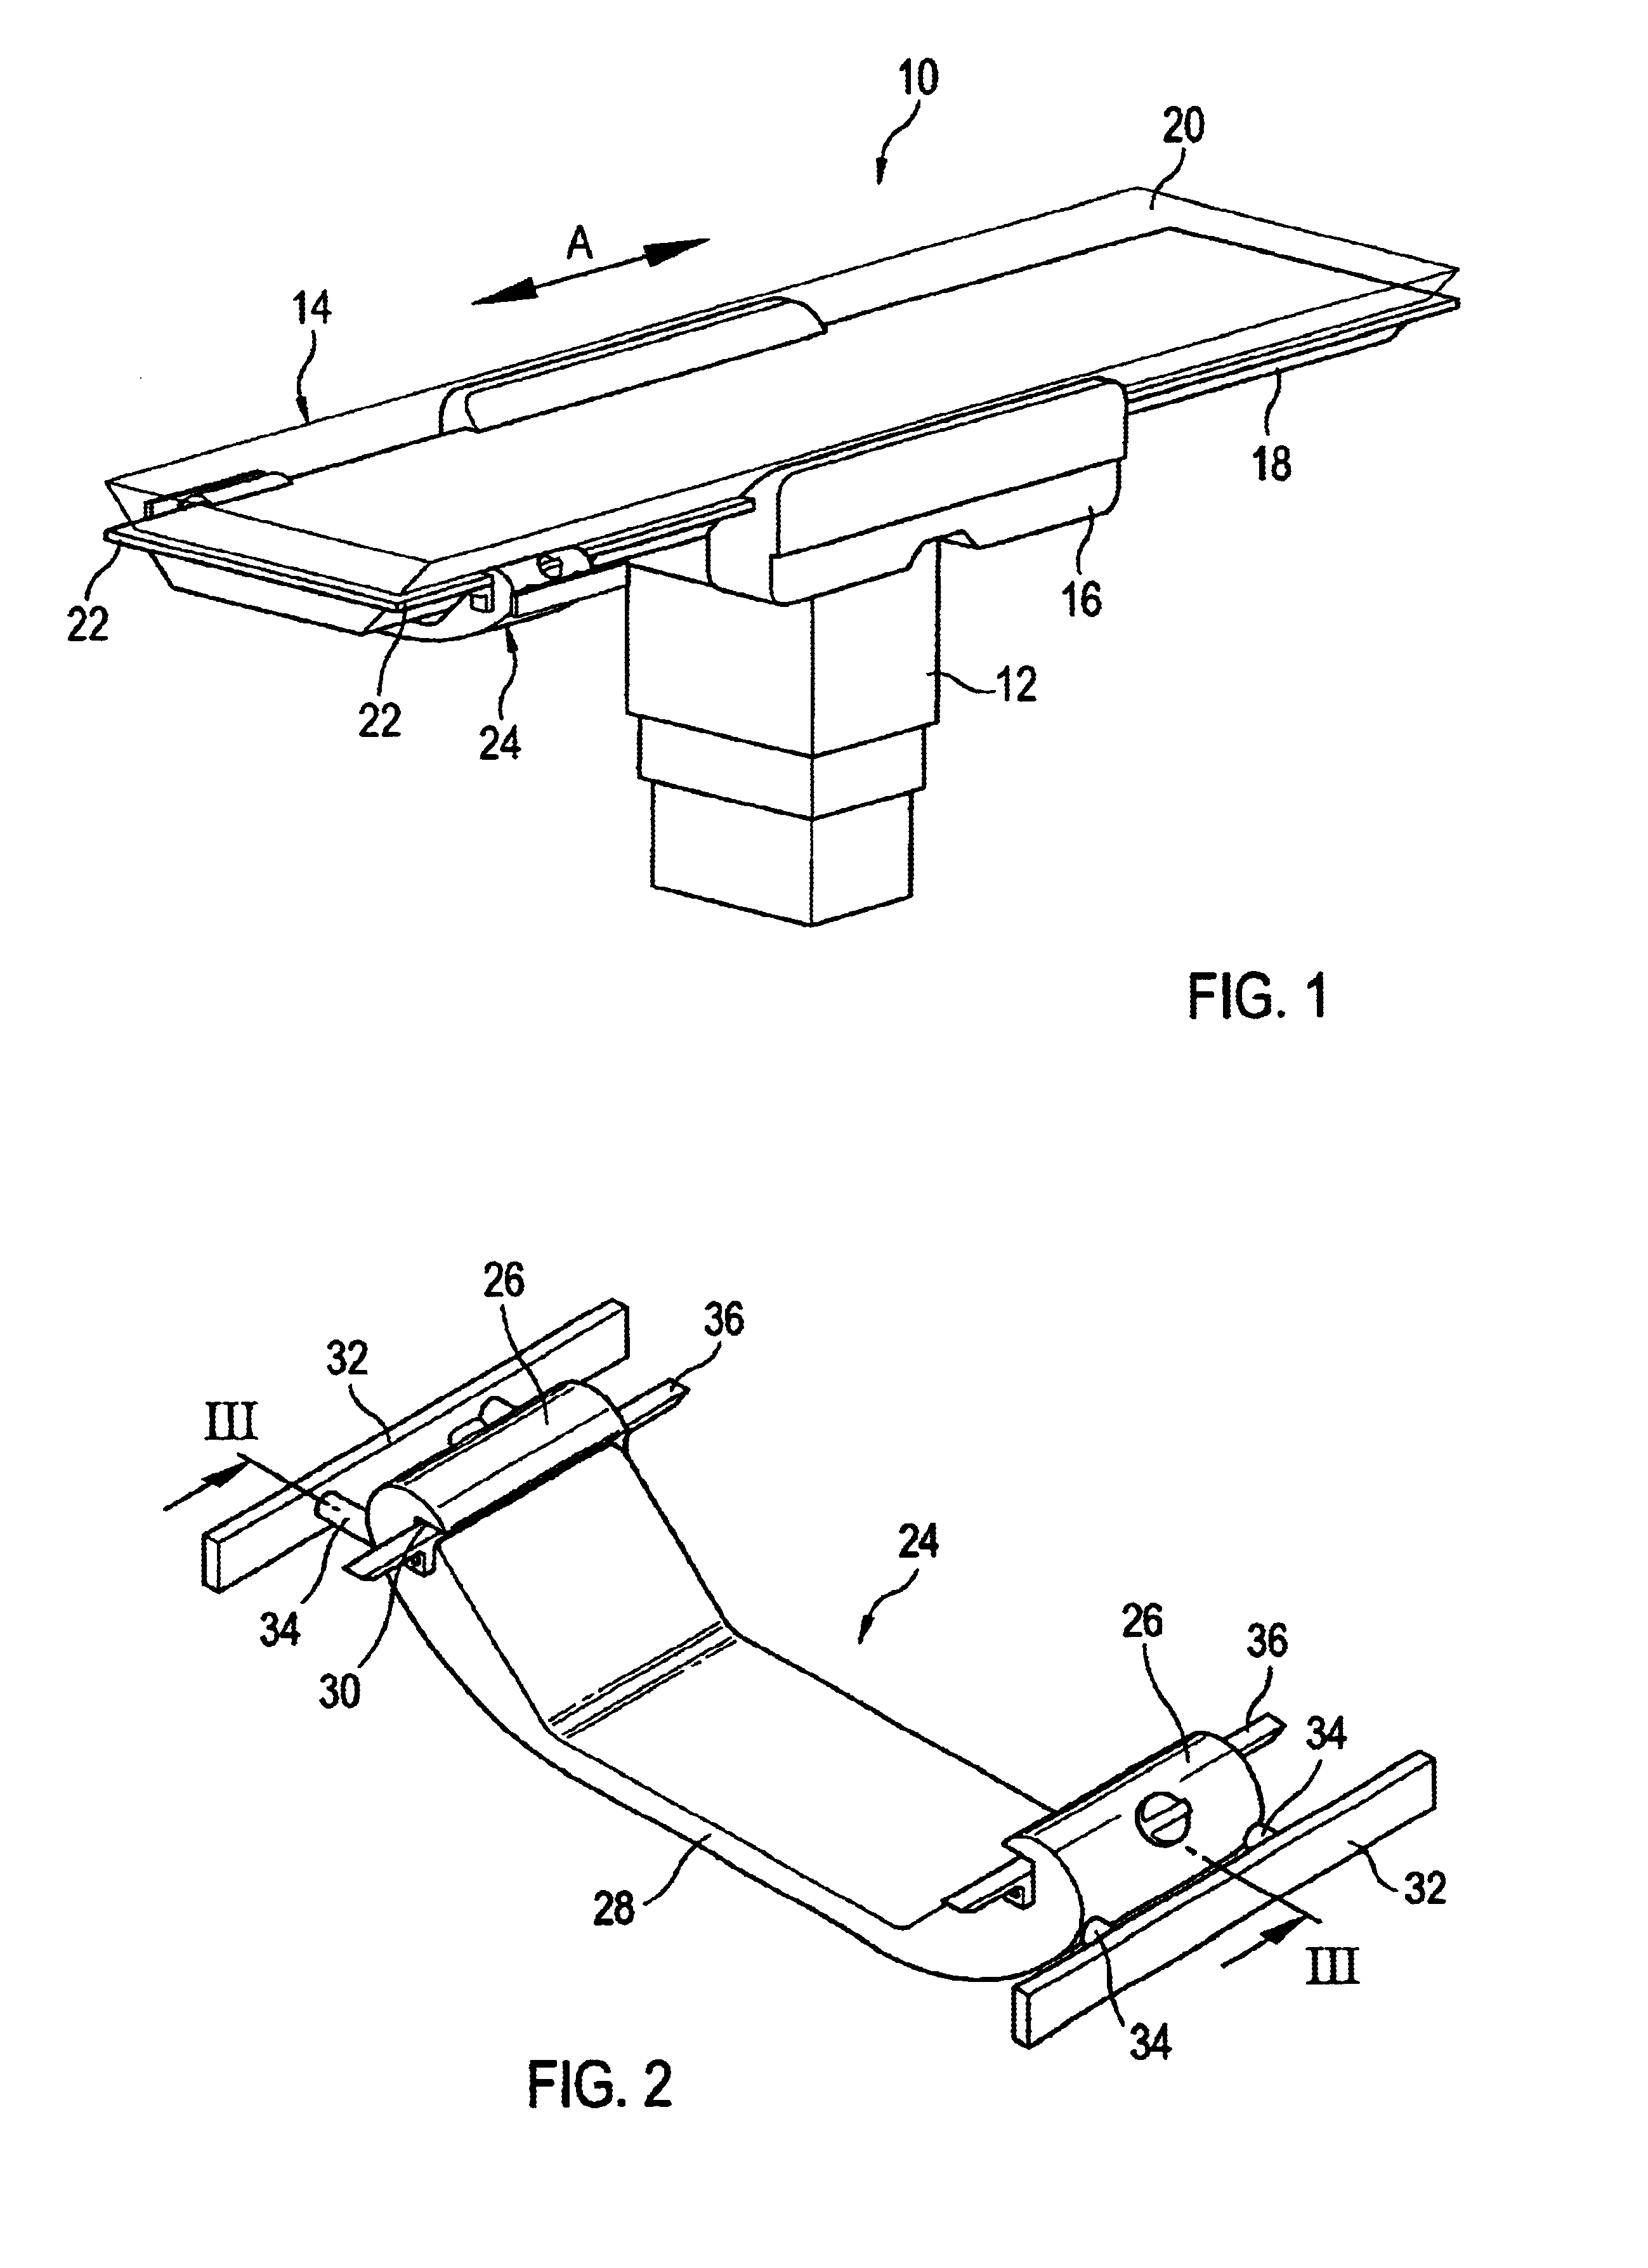 Arrangement for holding accessory parts to a patient support surface